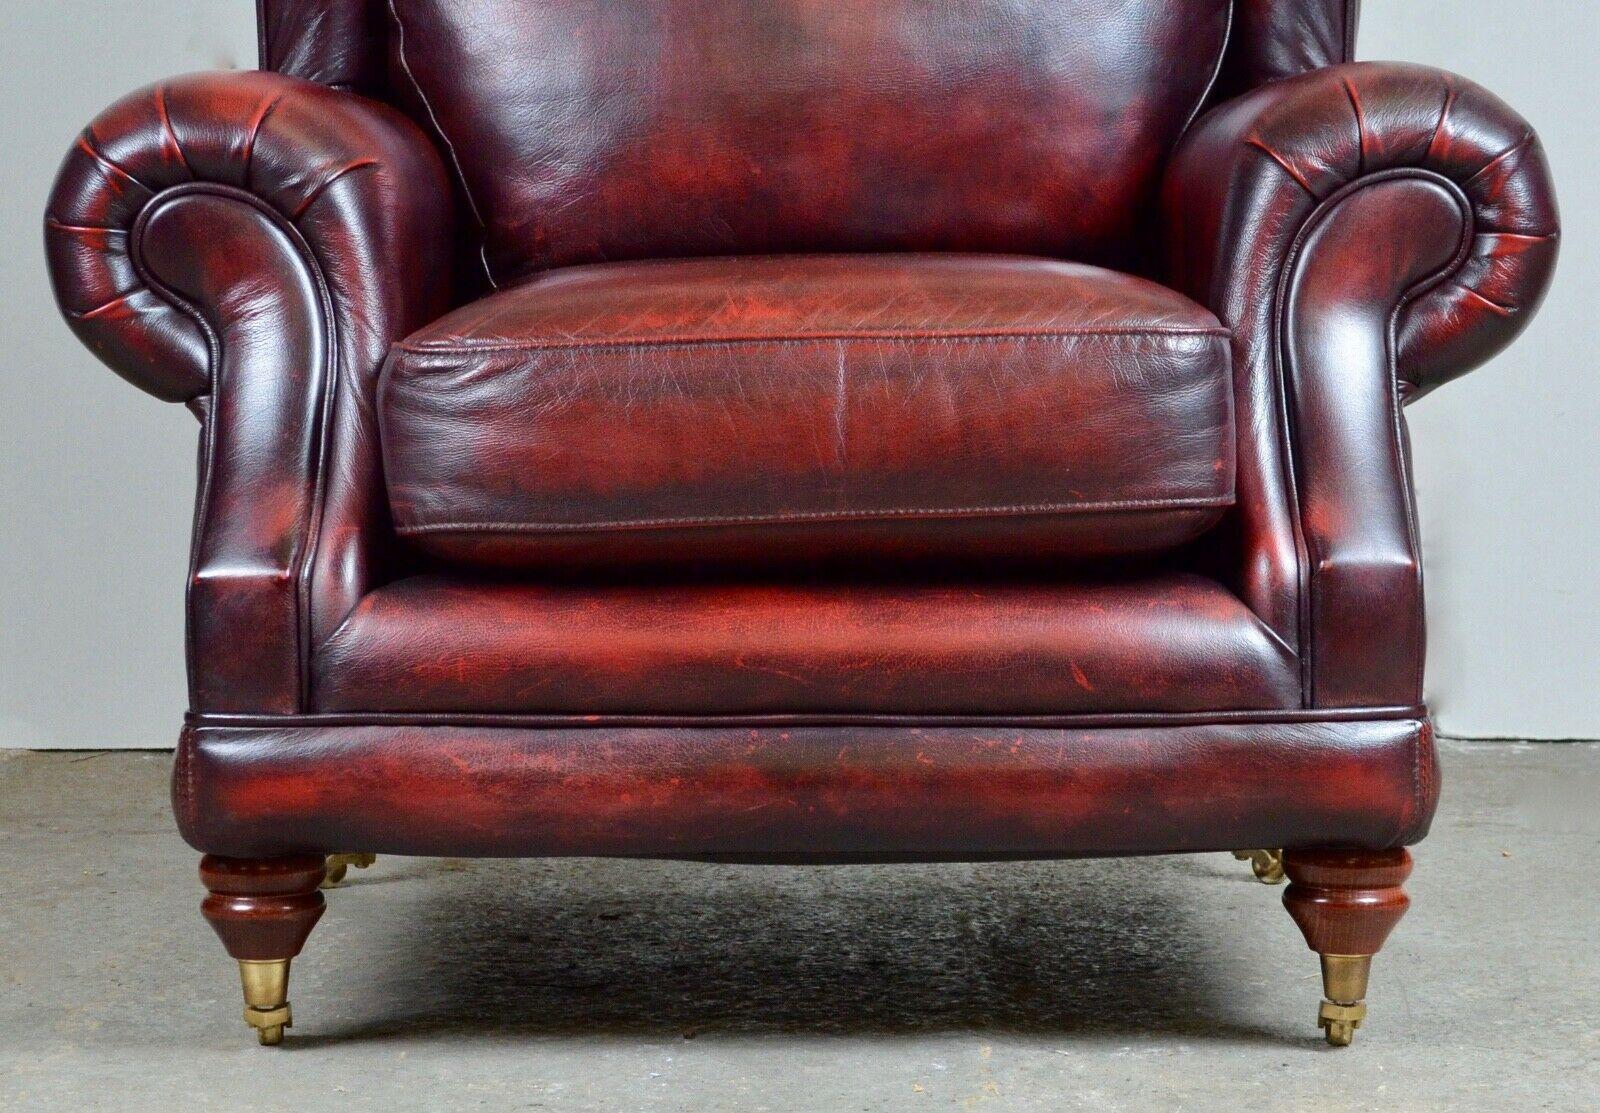 20th Century THOMAS LLOYD OXBLOOD RED LEATHER ARMCHAiR MATCHING SOFA ALSO AVAILABLE